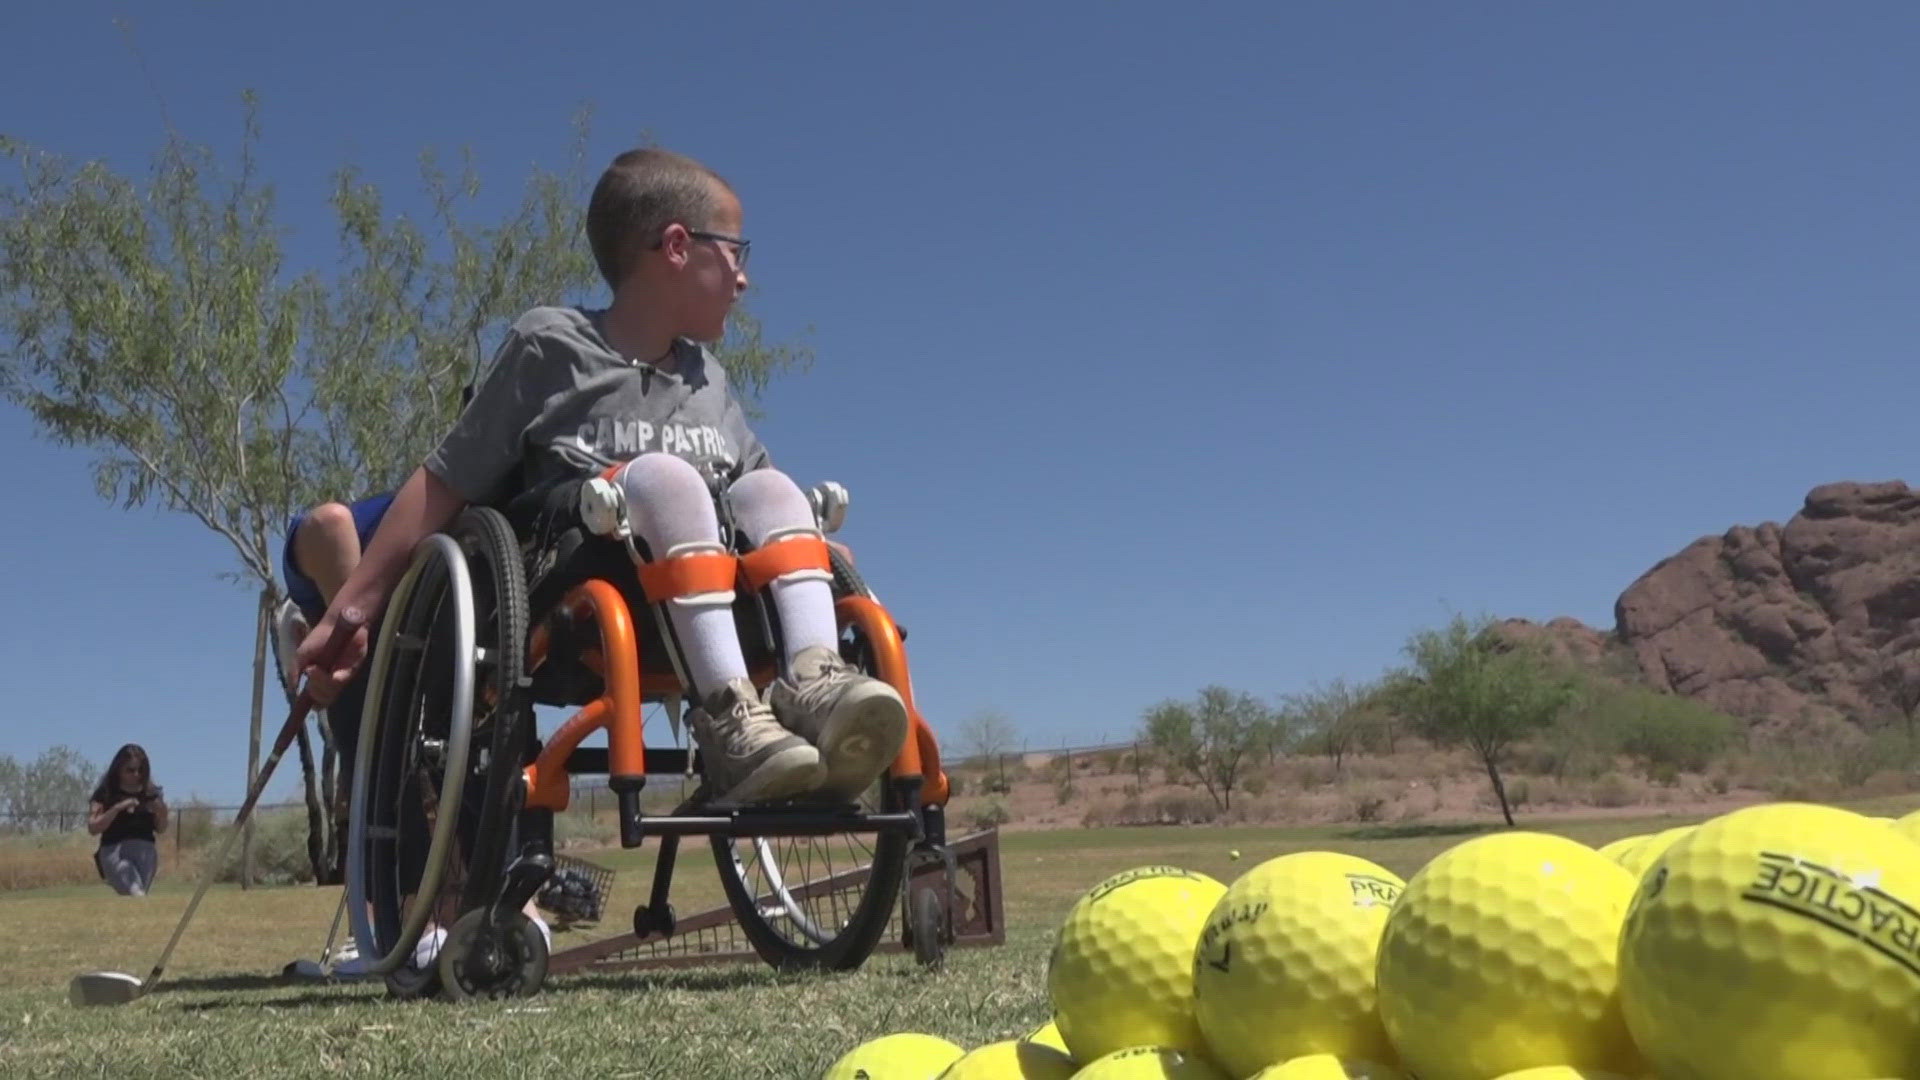 One group is adapting the game of golf so that the enjoyment becomes even more accessible.